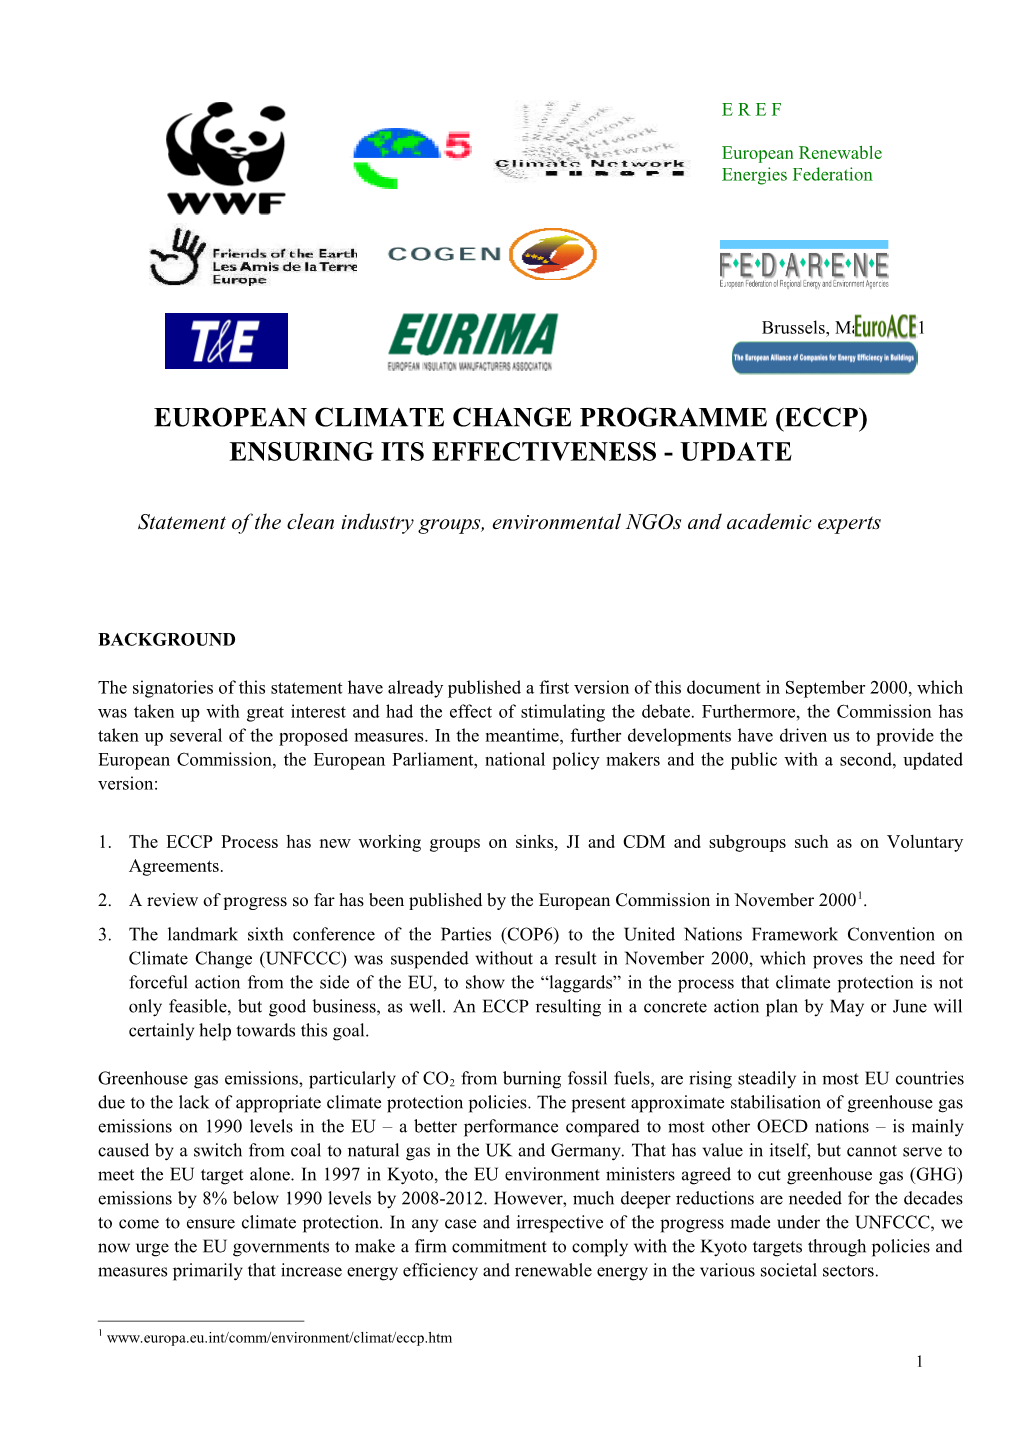 Statement of the Clean Industry Groups, Academic Experts and Environmental Ngos Participating